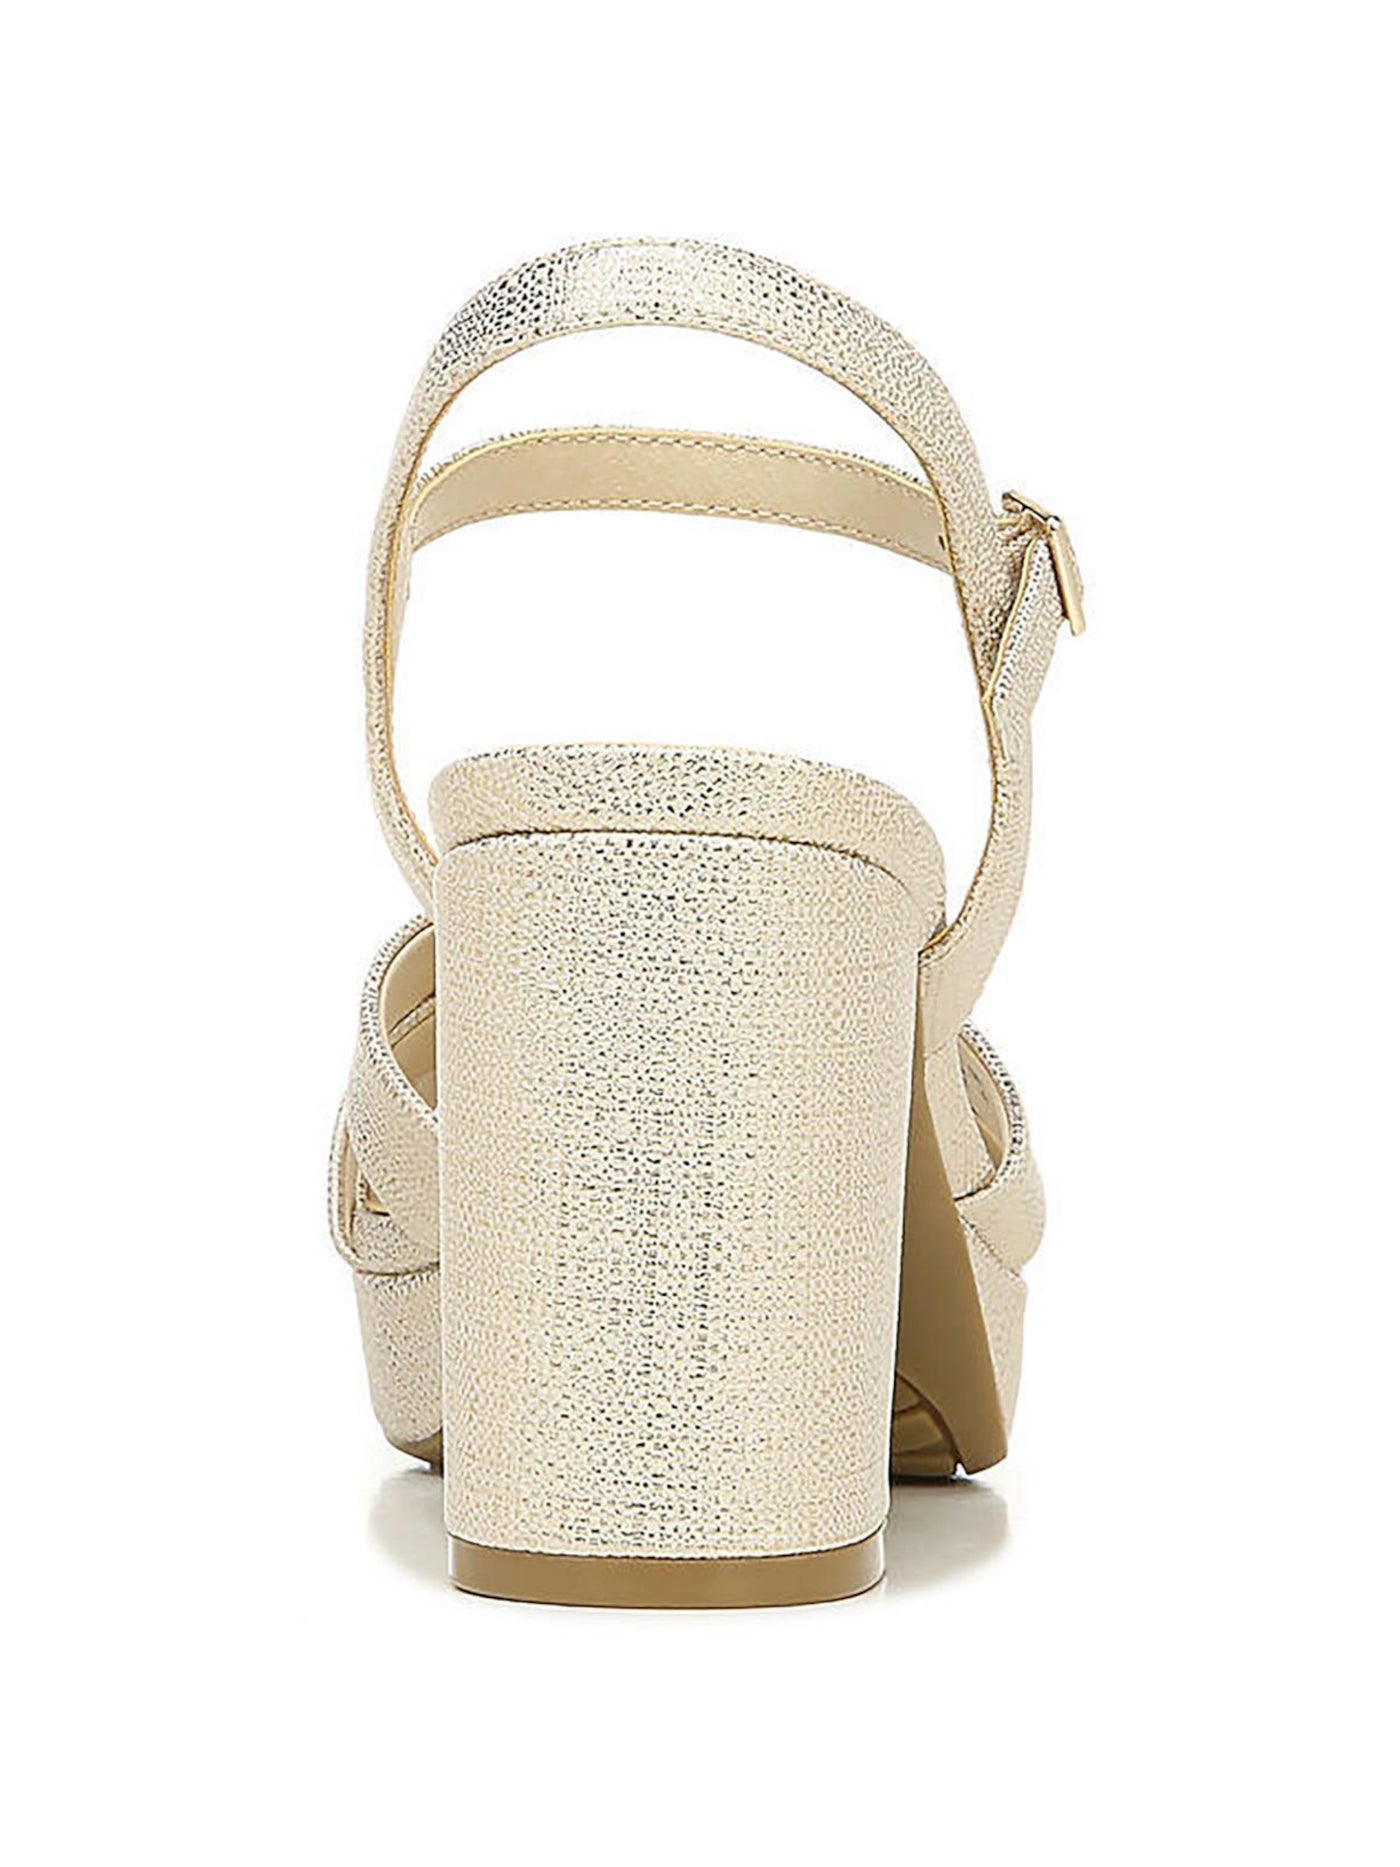 LIFE STRIDE Womens Beige Patterned Knot Detail Cushioned 1" Platform Metallic Adjustable Ankle Strap Lucky Open Toe Block Heel Buckle Dress Sandals Shoes 9.5 M